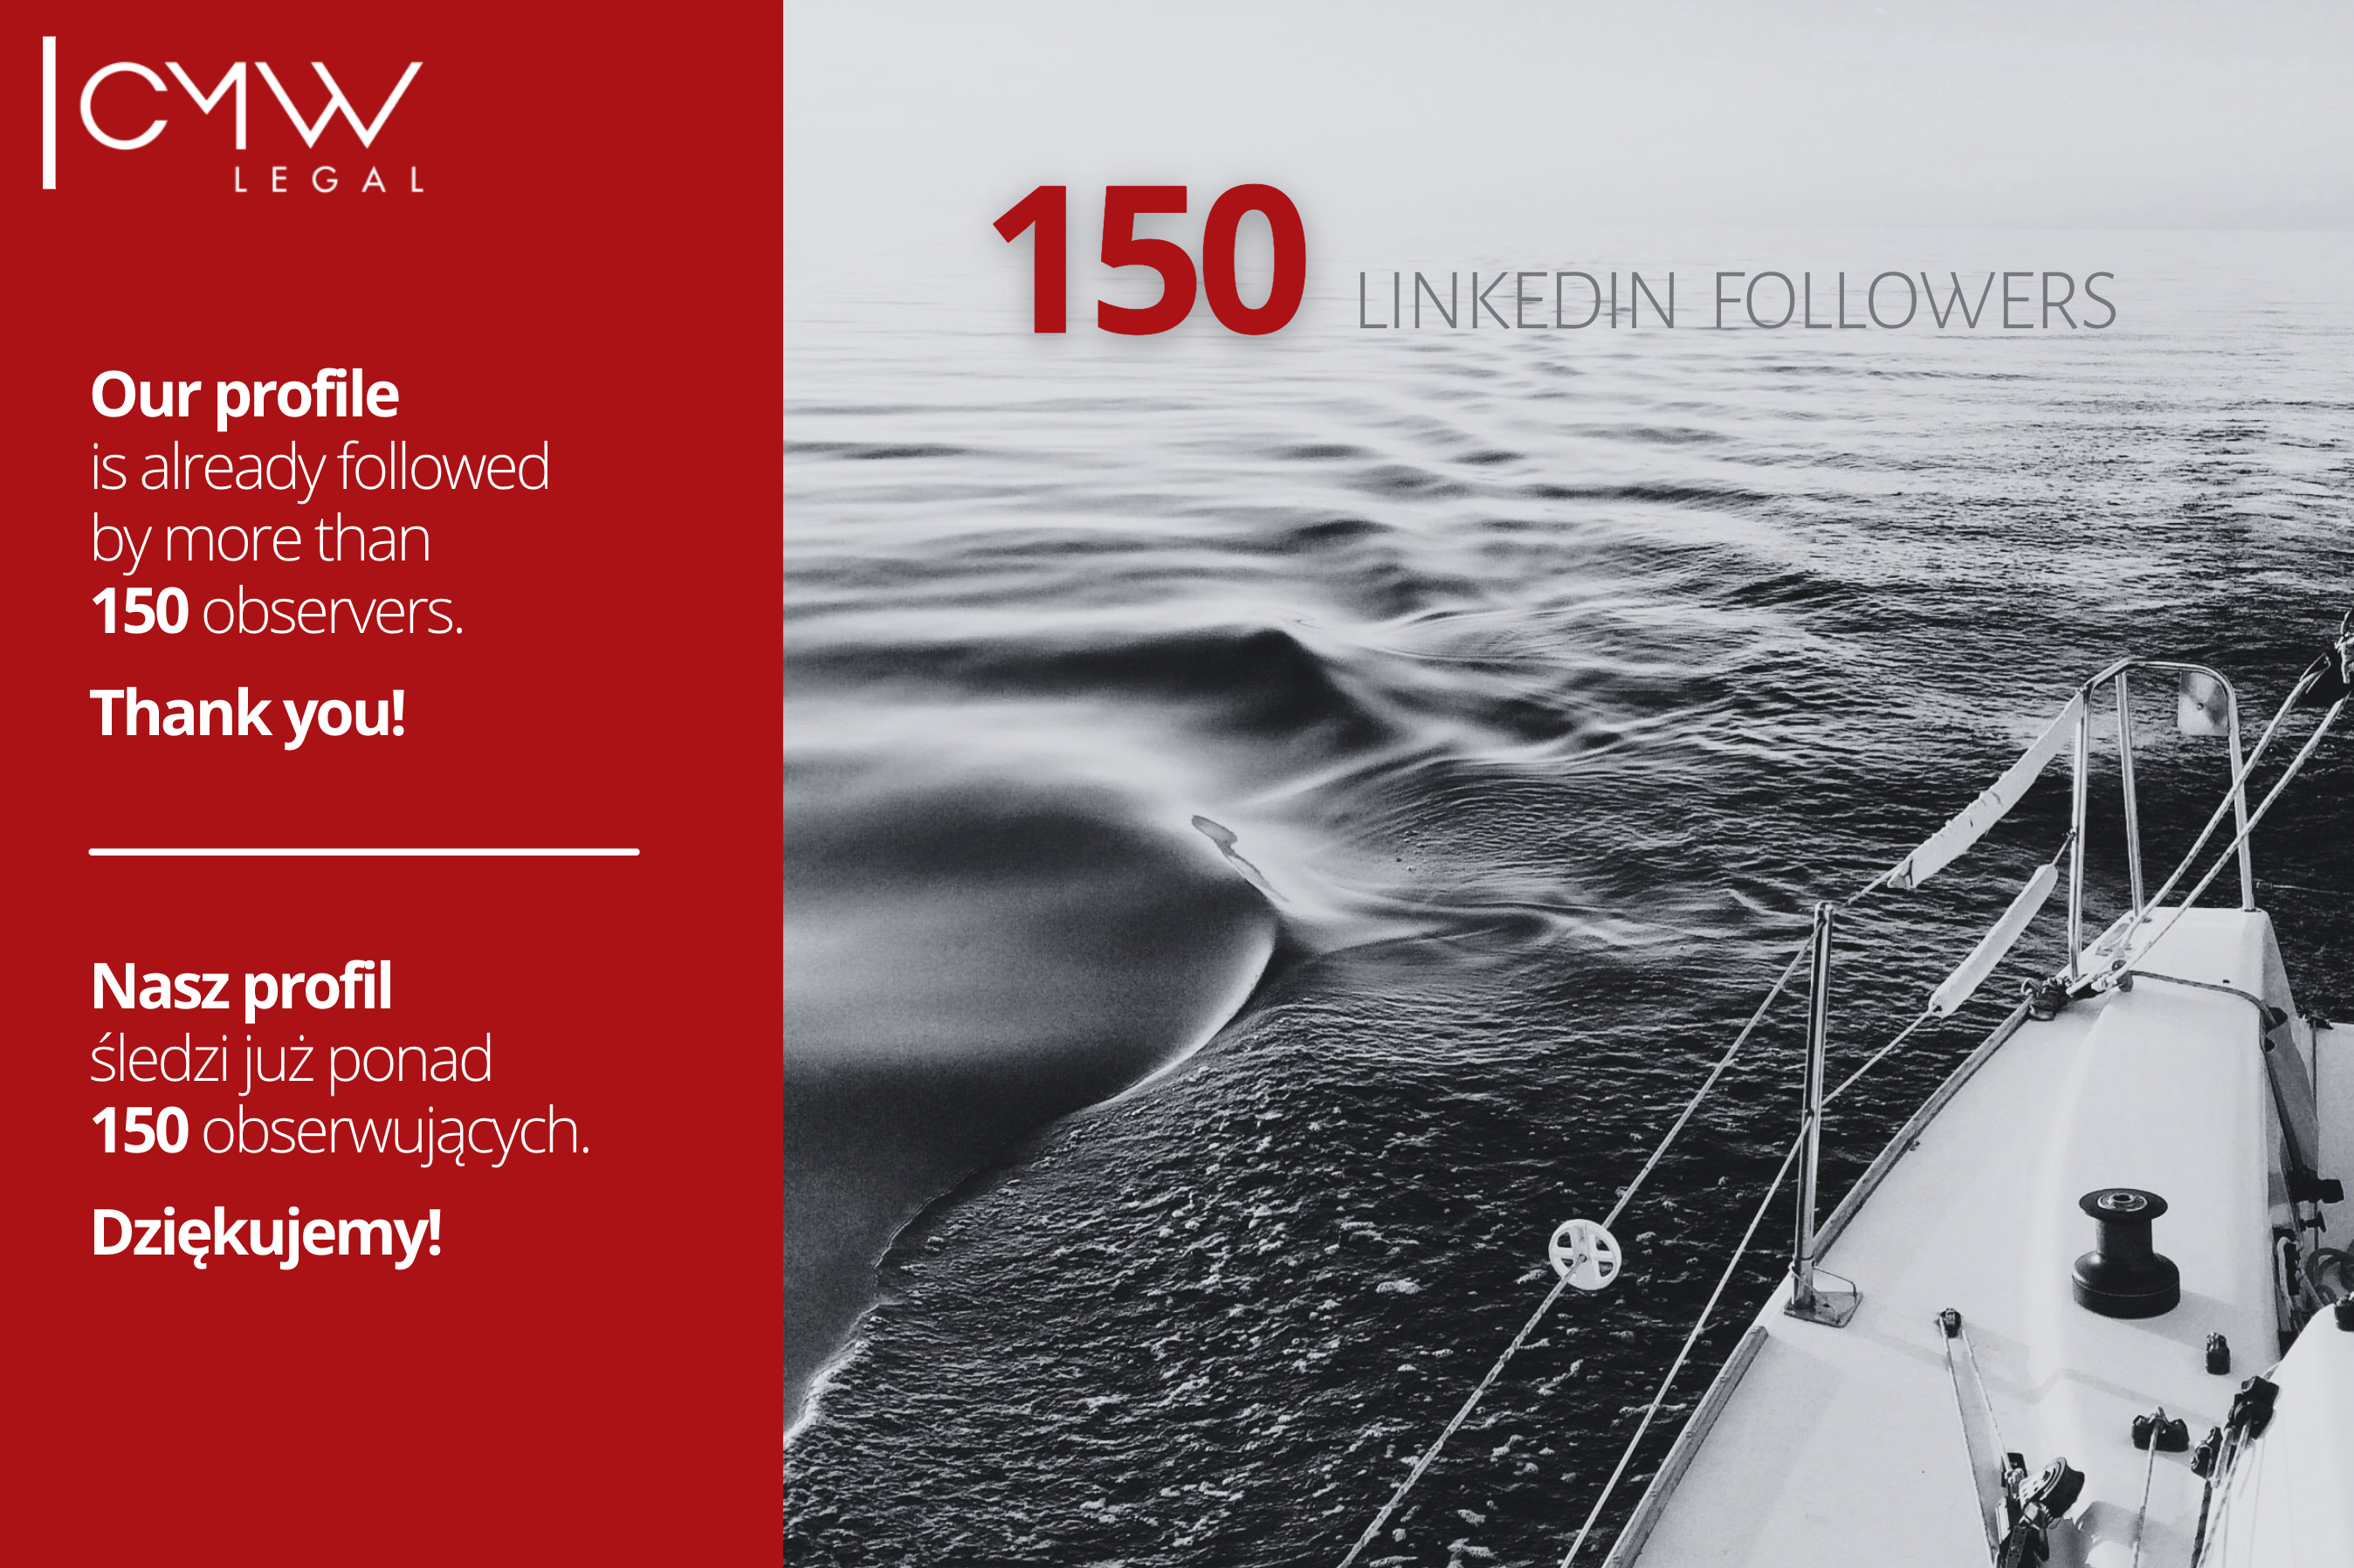  We have more than 150 followers on LinkedIn!